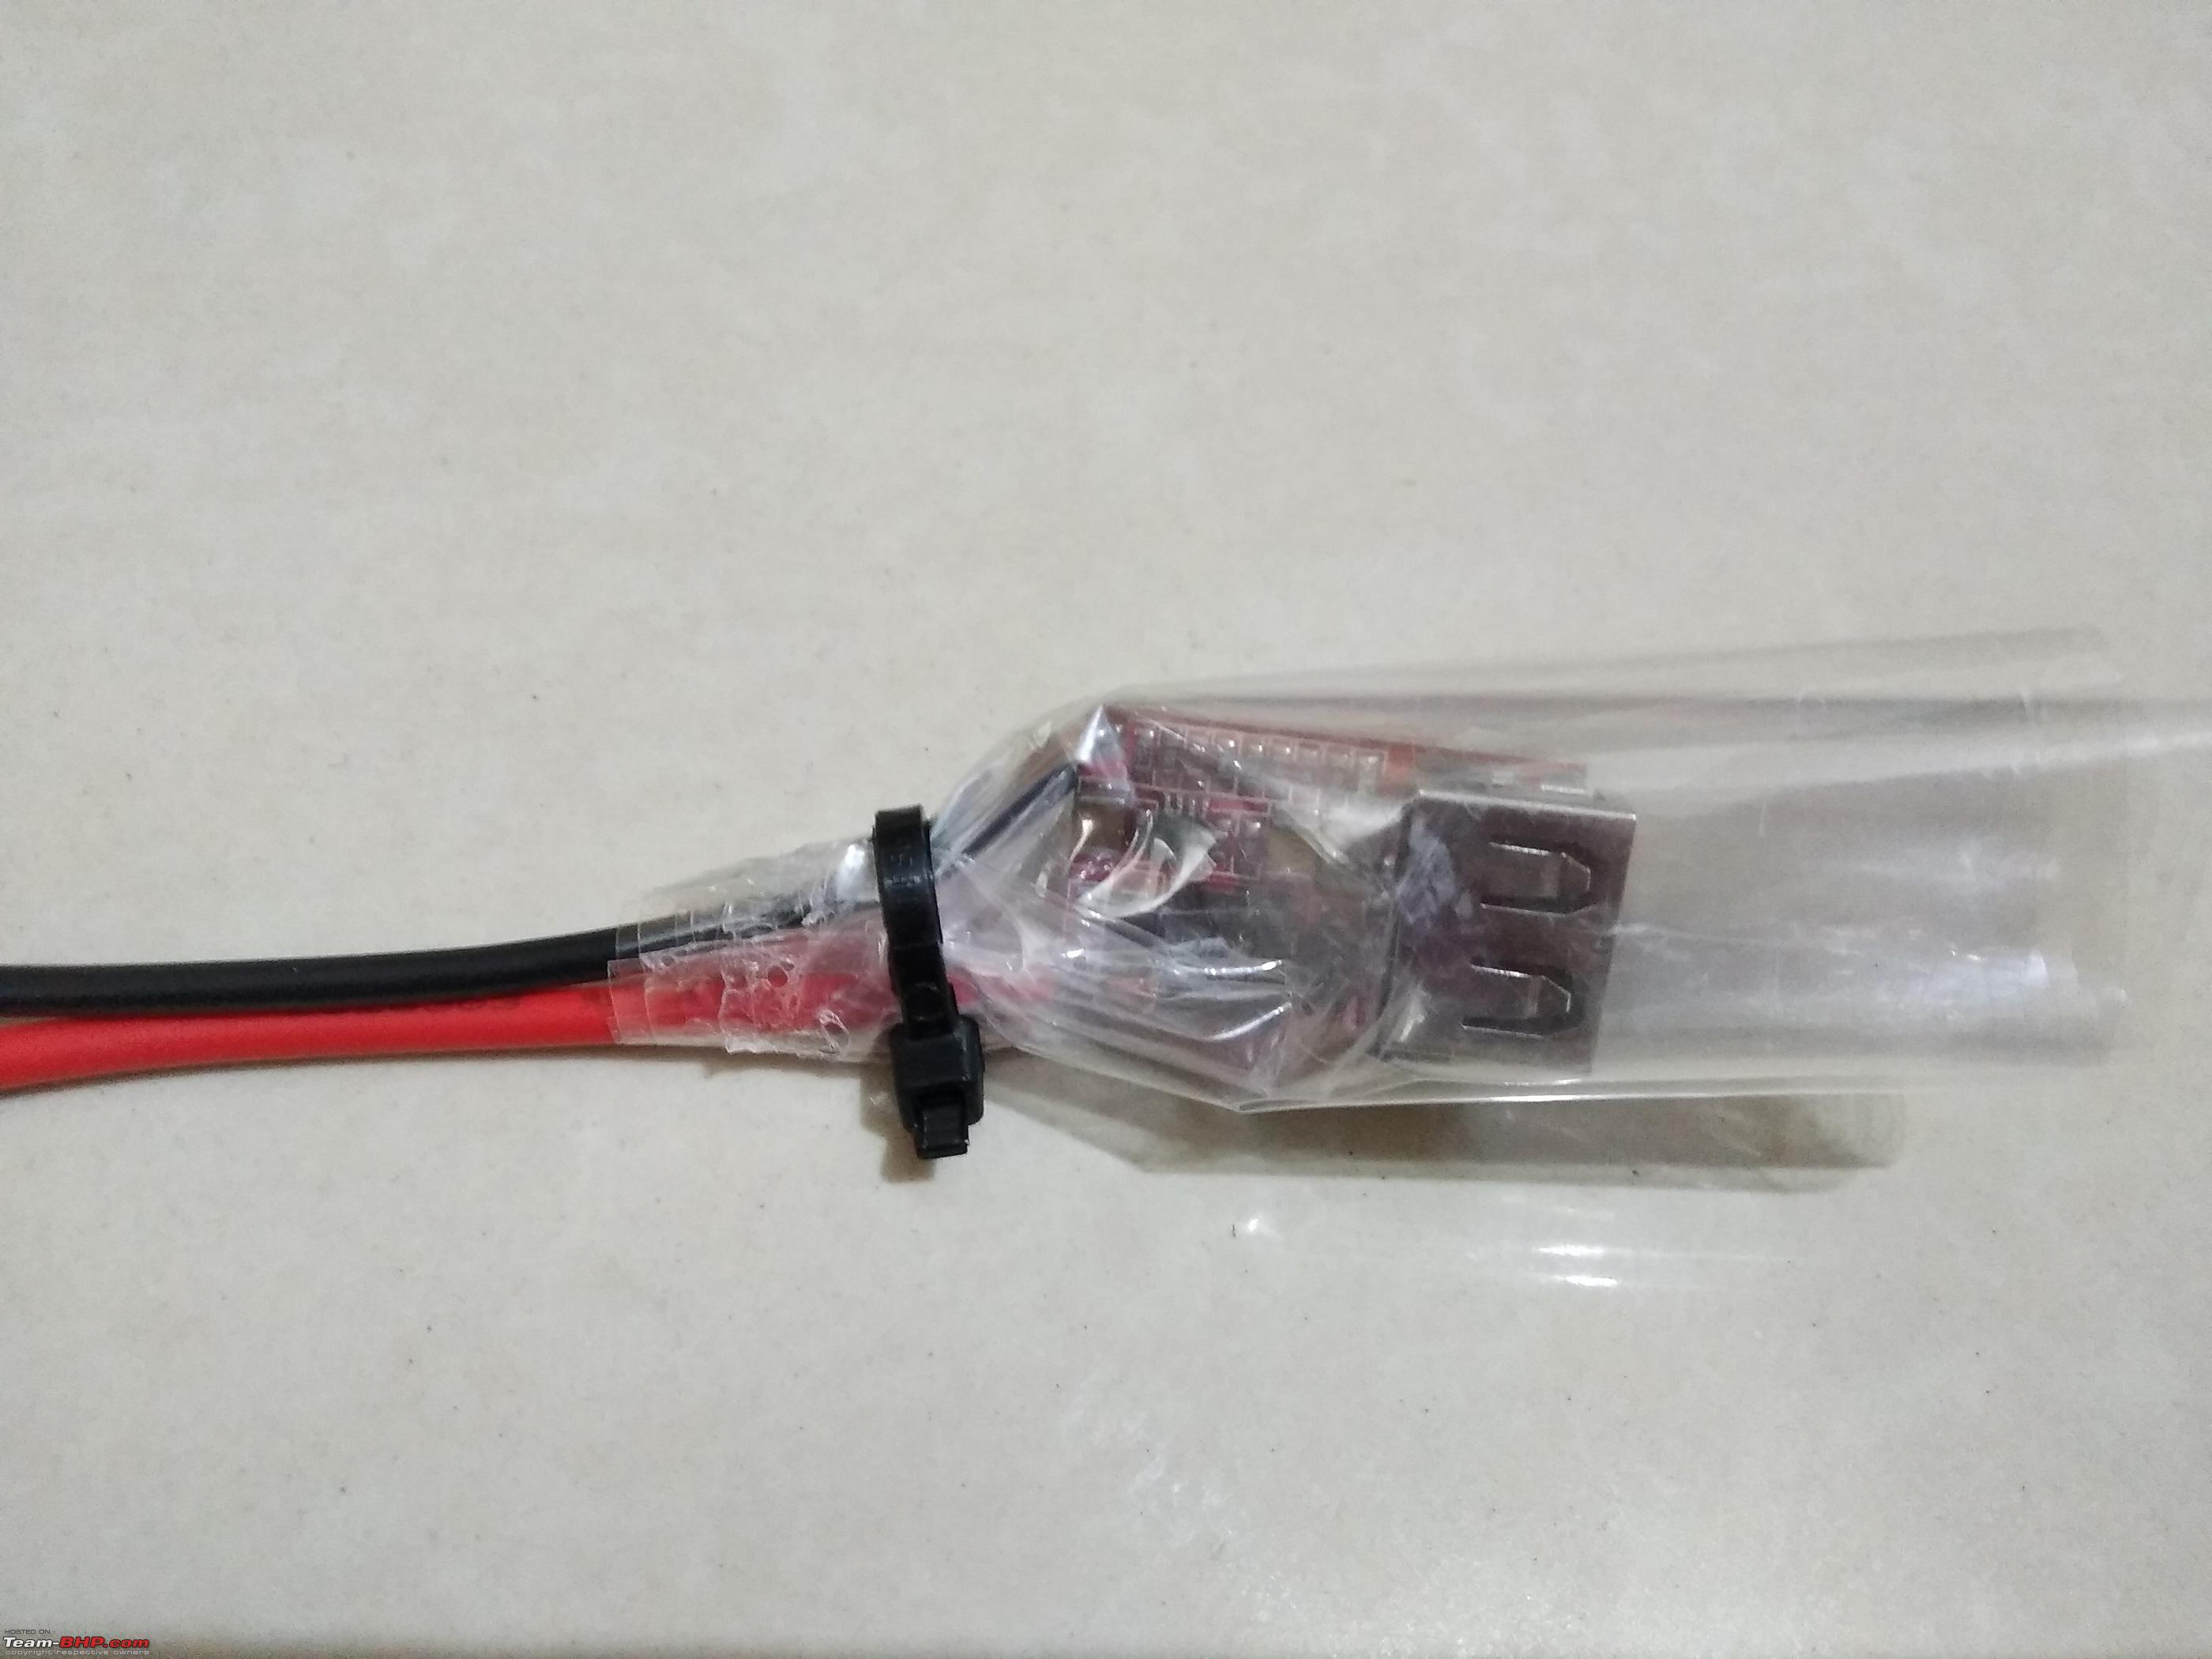 https://www.team-bhp.com/forum/attachments/diy-do-yourself/2052550d1599462393-diy-hard-wire-your-dash-cam-without-expensive-hard-wire-kit-moduleinsulation.jpg